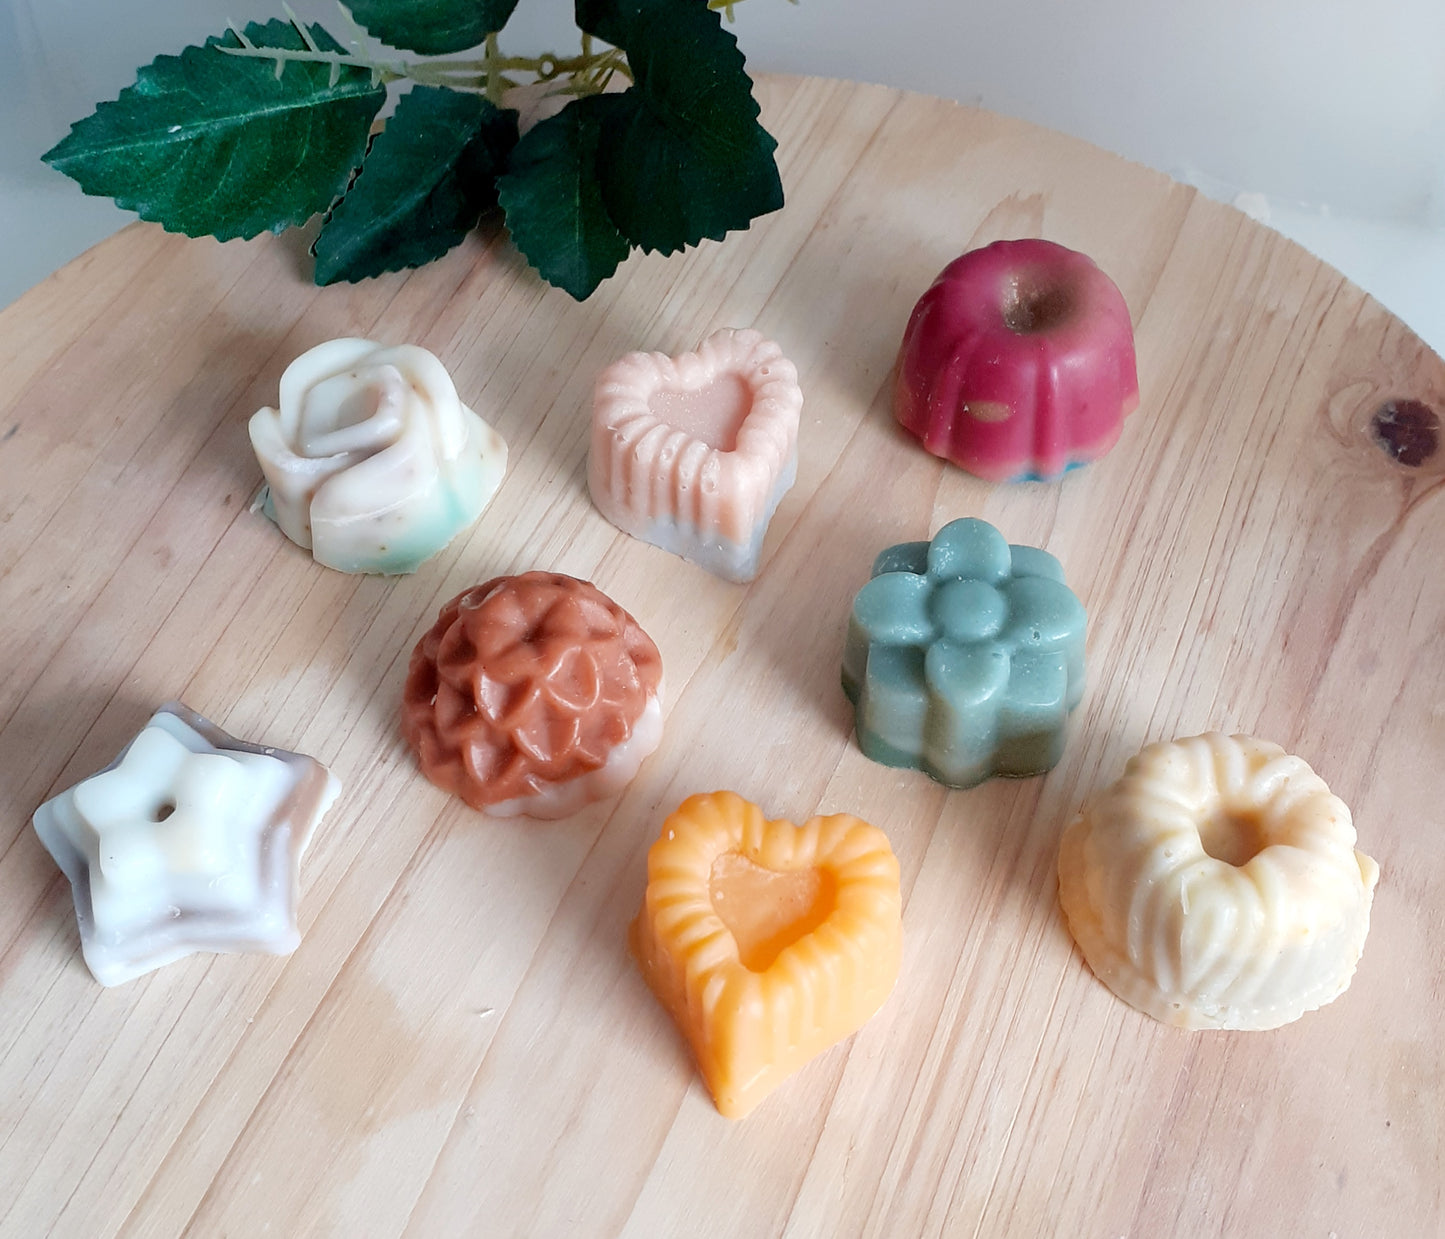 Small cleaning soaps